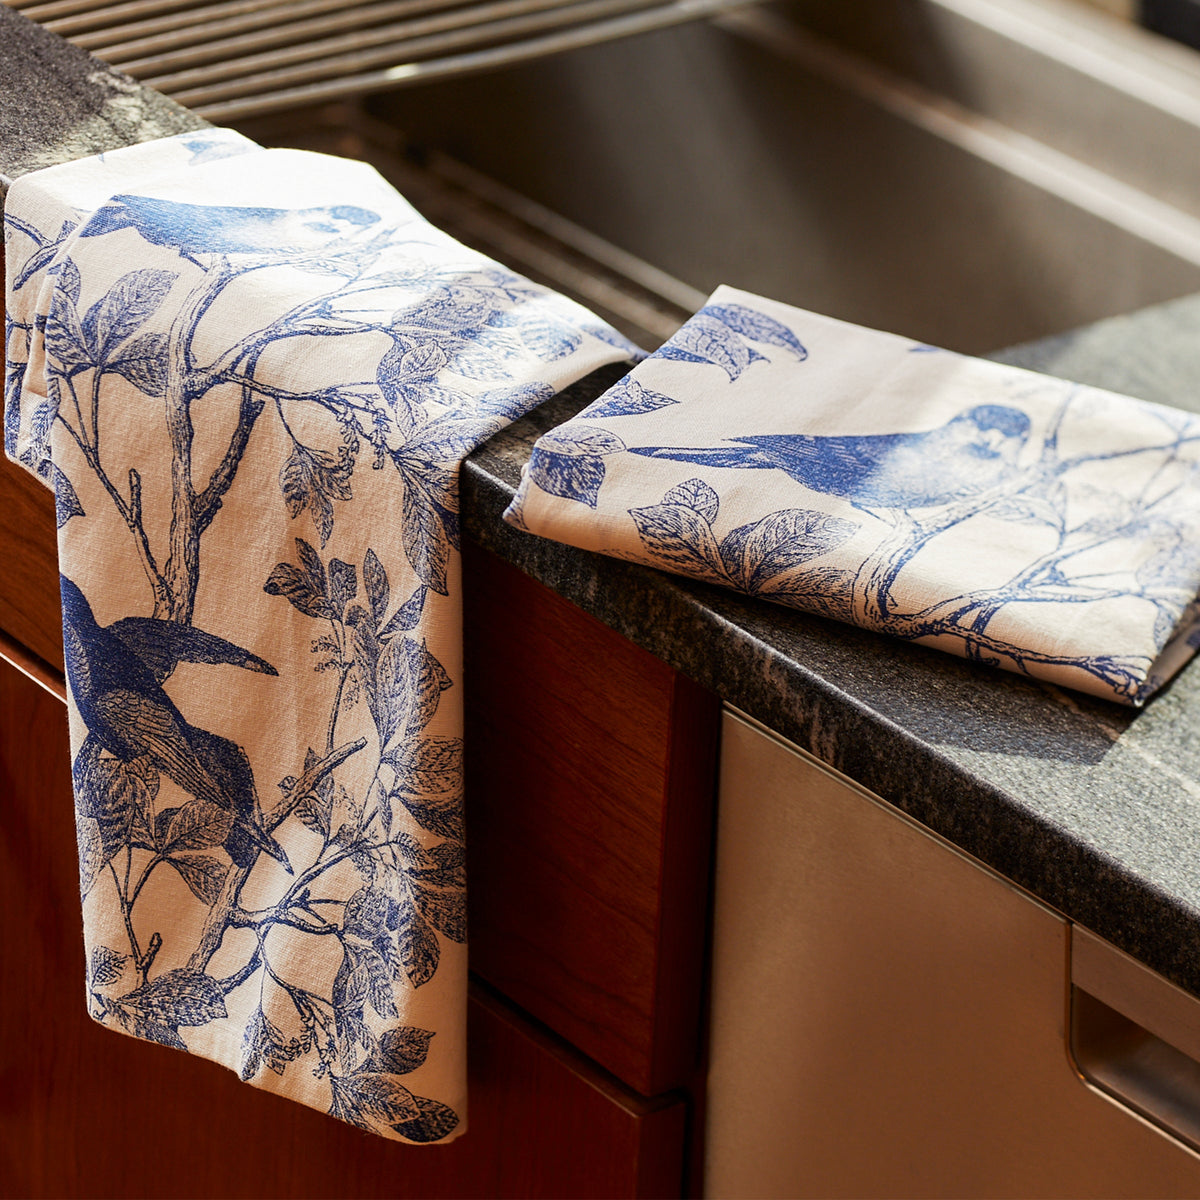 Arbor Blue Birds Kitchen Towels in 100% Cotton, Sold as a set of 2 from Caskata